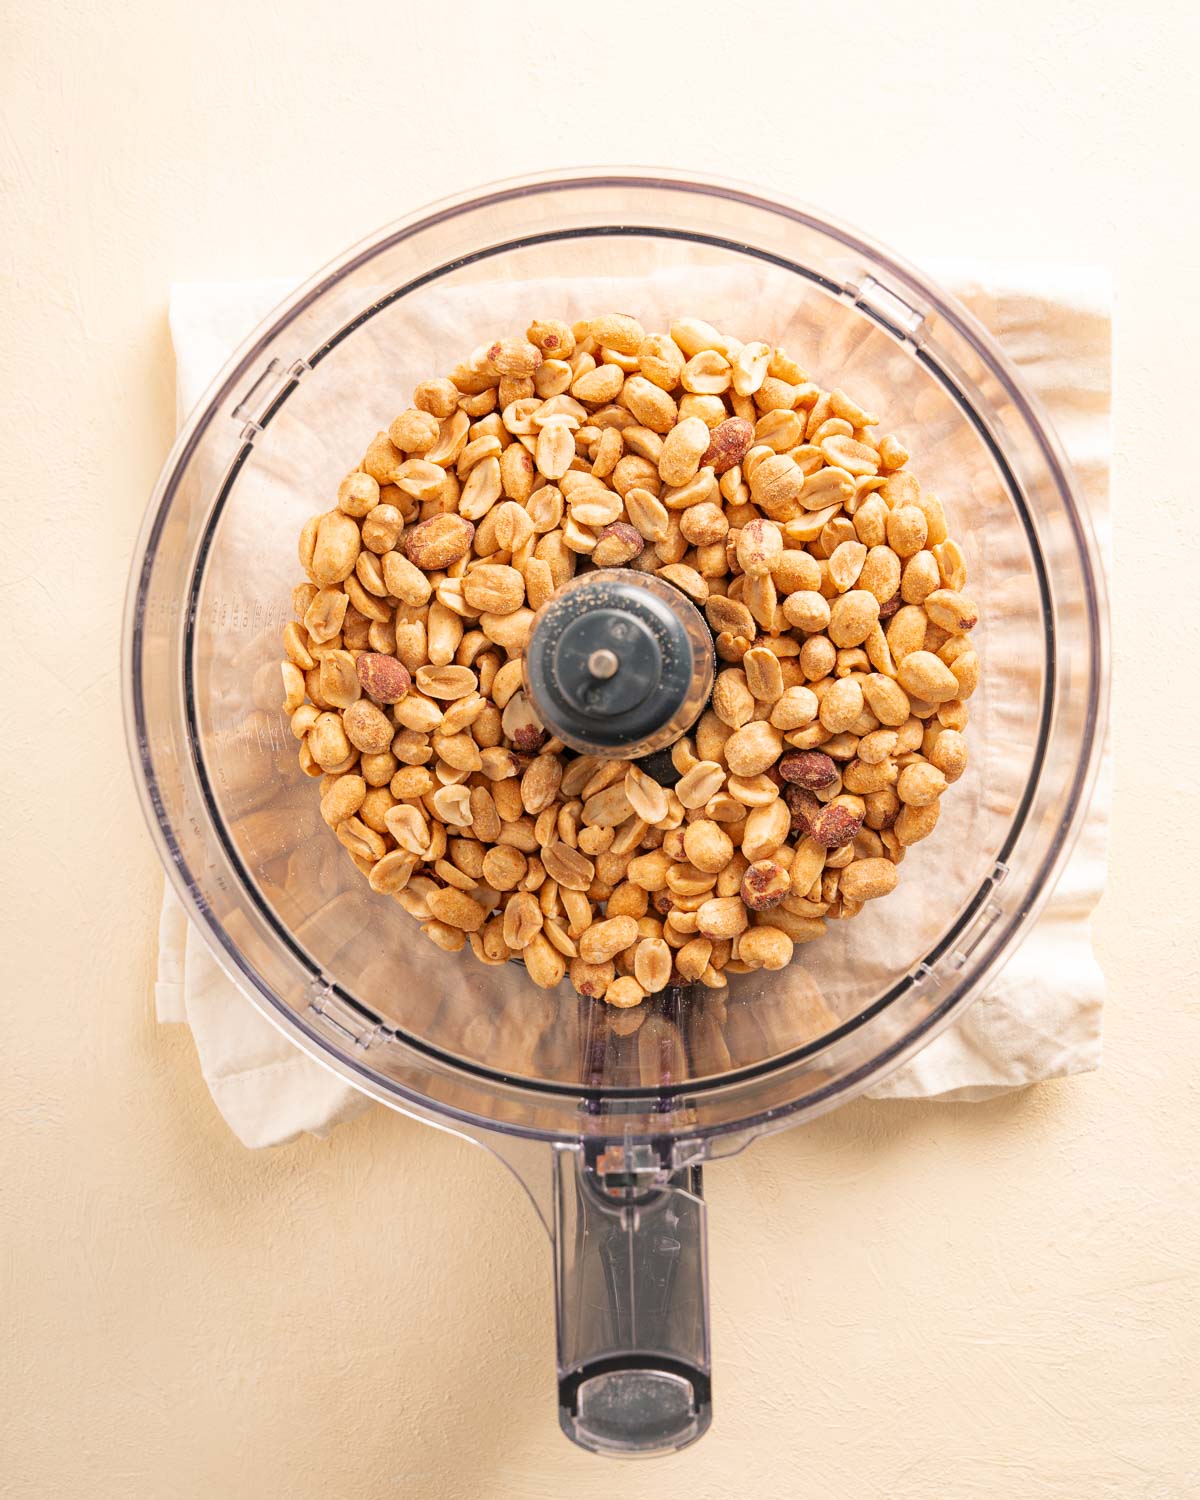 A food processor filled with peanuts